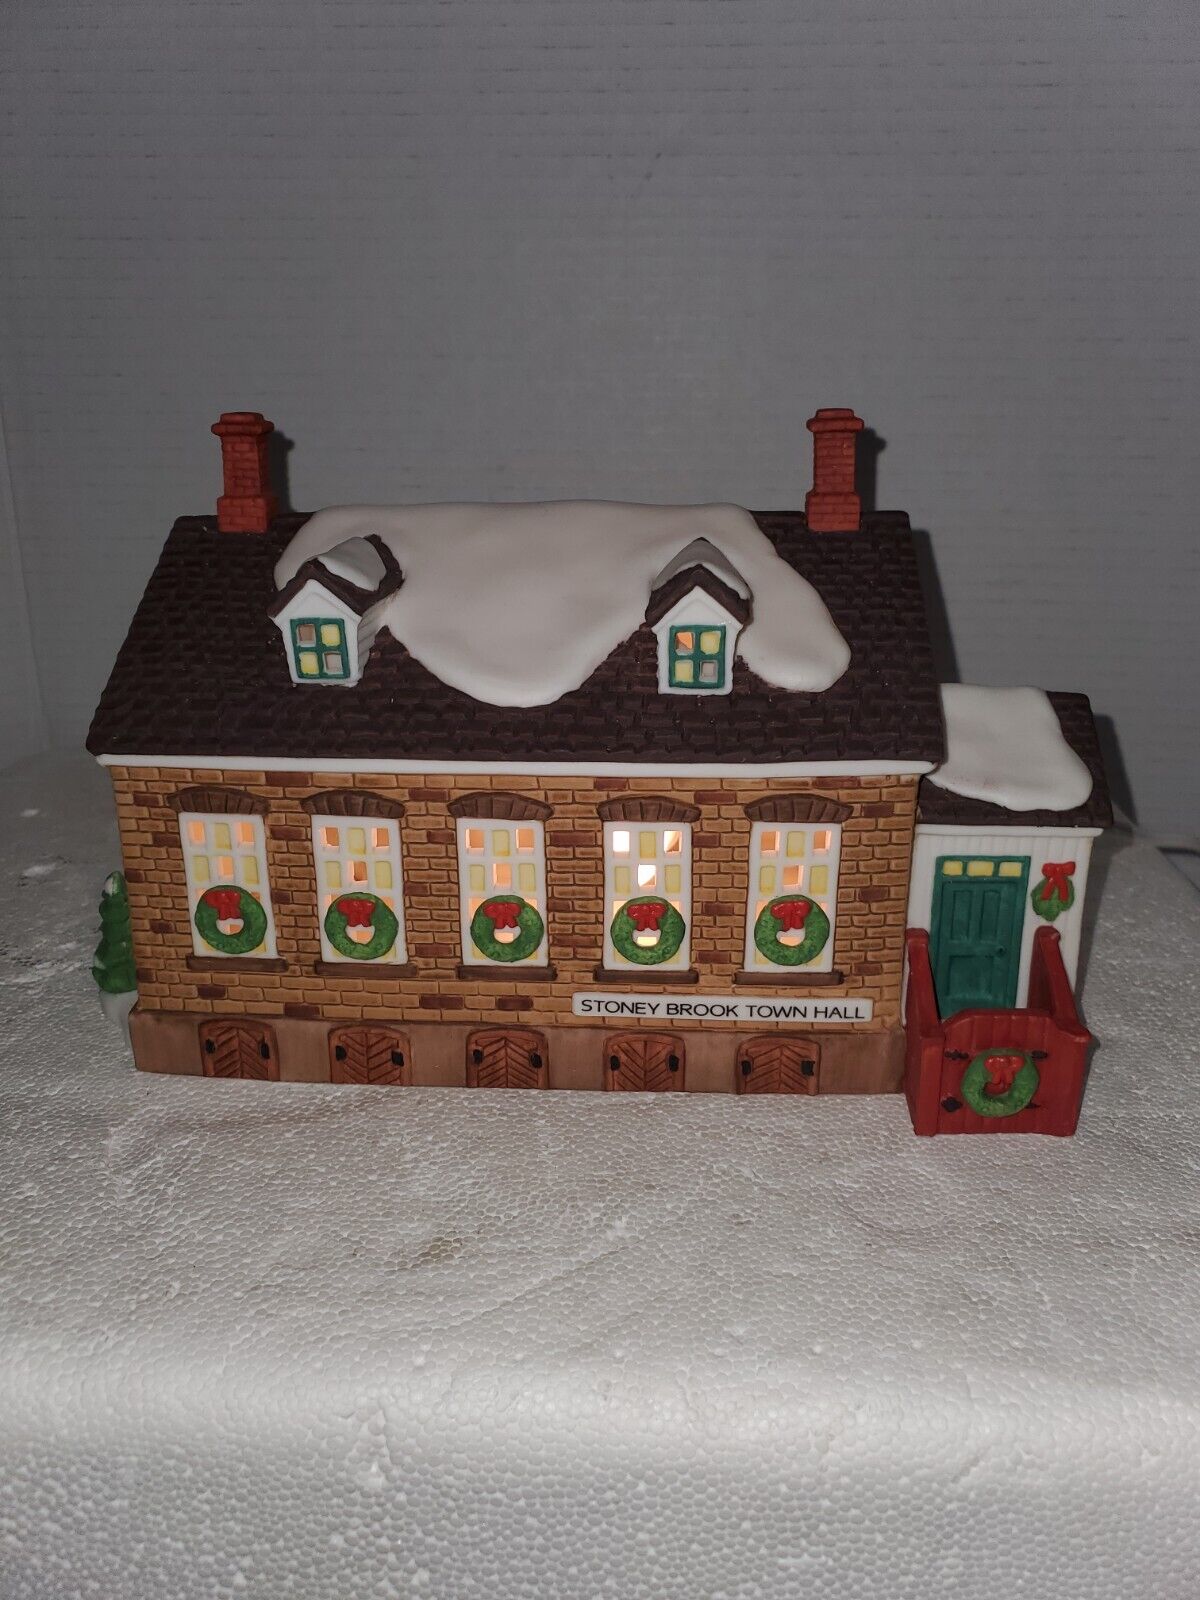 Department 56 Heritage Village Stoney Brook Town Hall Light Up Building